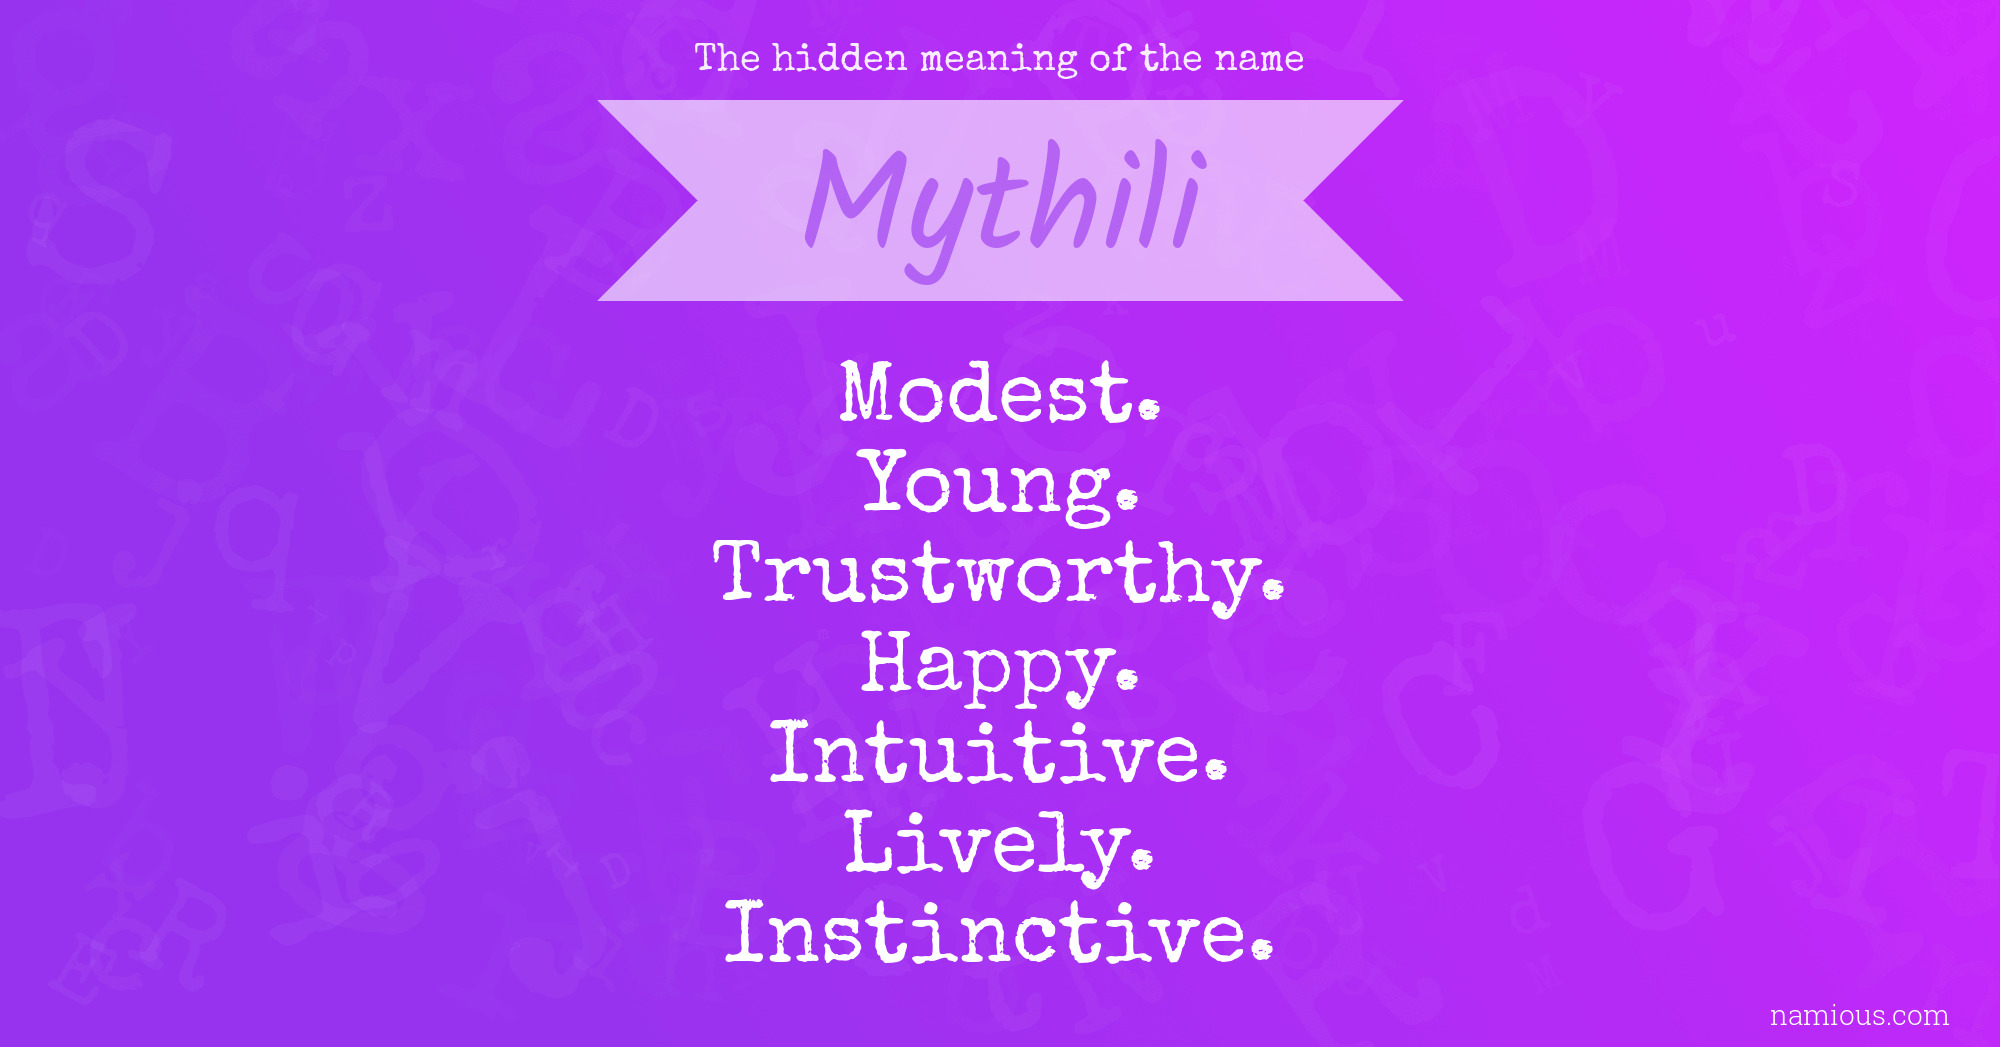 The hidden meaning of the name Mythili